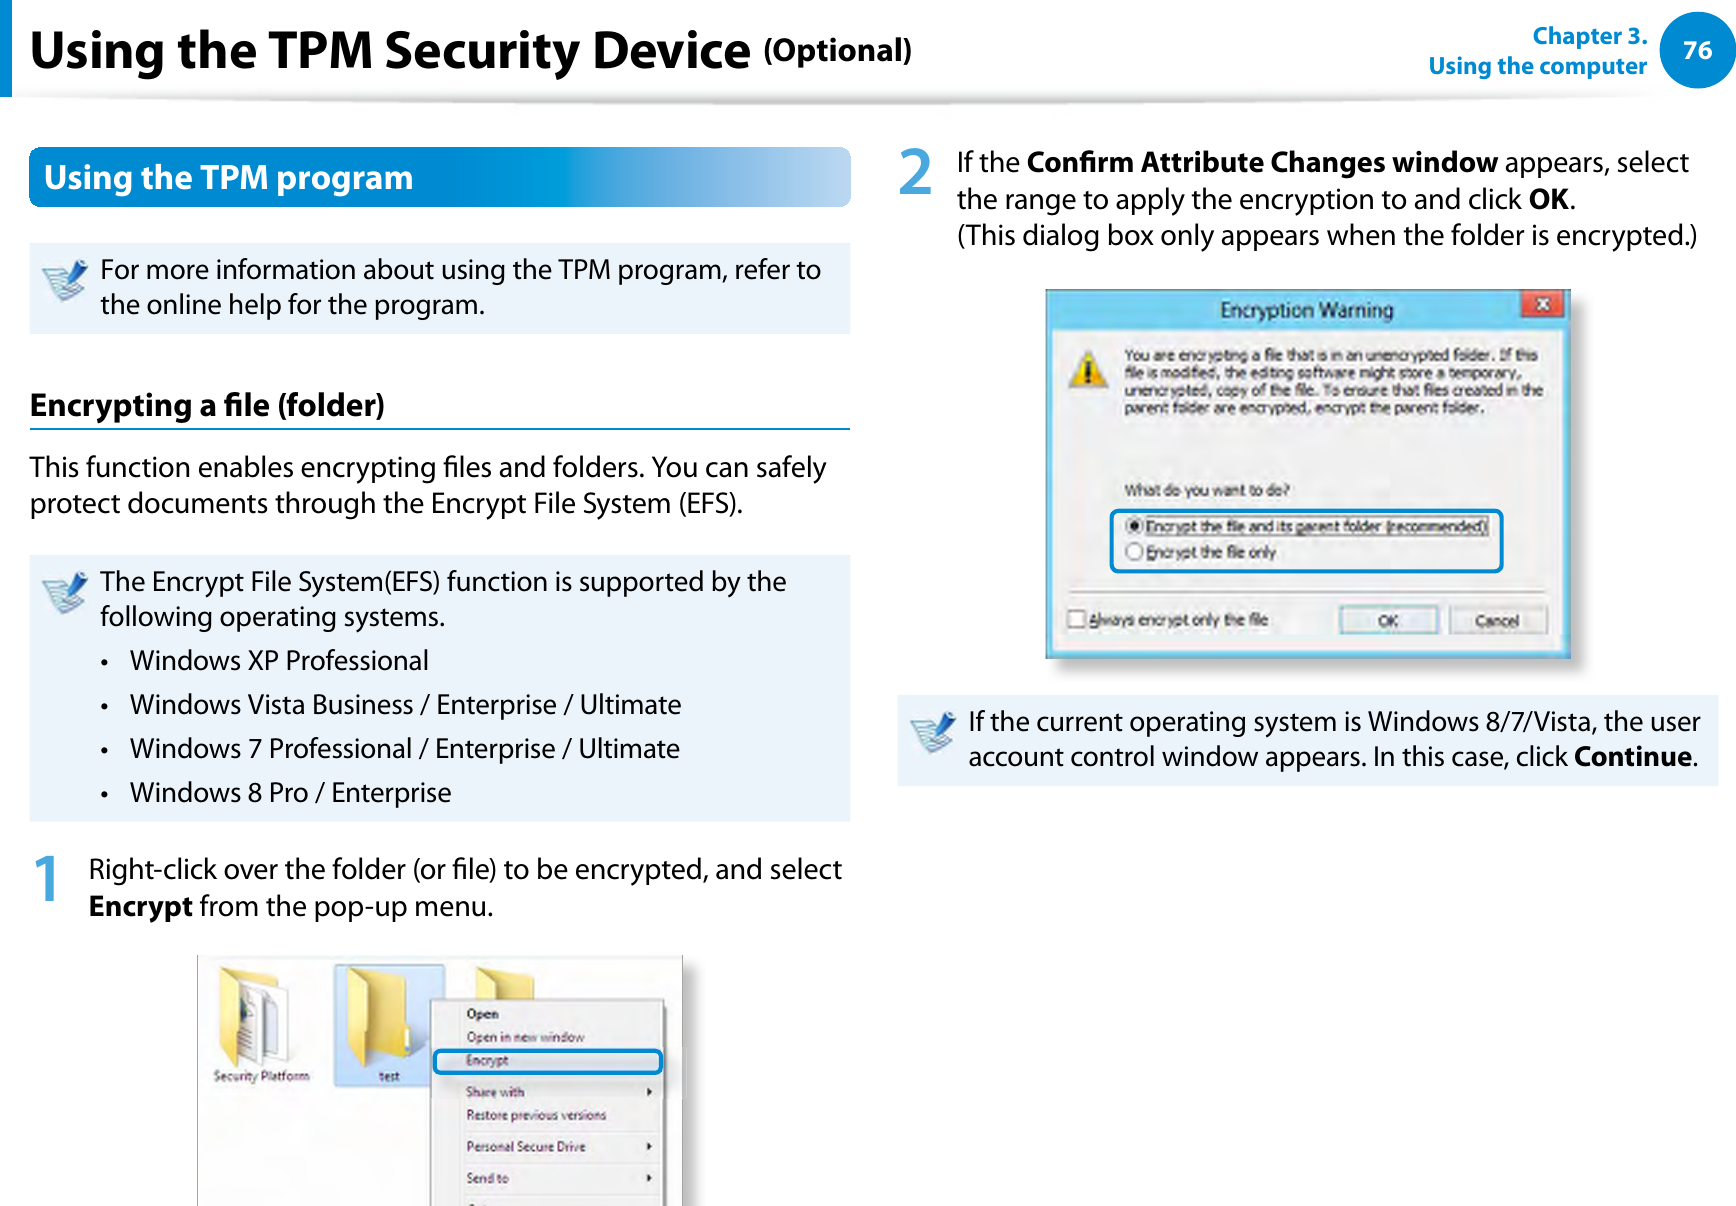 76Chapter 3.  Using the computerUsing the TPM Security Device (Optional)Using the TPM programFor more information about using the TPM program, refer to the online help for the program.Encrypting a le (folder) This function enables encrypting les and folders. You can safely protect documents through the Encrypt File System (EFS).The Encrypt File System(EFS) function is supported by the following operating systems.Windows XP Professional t Windows Vista Business / Enterprise / Ultimatet Windows 7 Professional / Enterprise / Ultimate t Windows 8 Pro / Enterpriset 1  Right-click over the folder (or le) to be encrypted, and select Encrypt from the pop-up menu. 2 If the Conrm Attribute Changes window appears, select the range to apply the encryption to and click OK.  (This dialog box only appears when the folder is encrypted.)If the current operating system is Windows 8/7/Vista, the user account control window appears. In this case, click Continue.